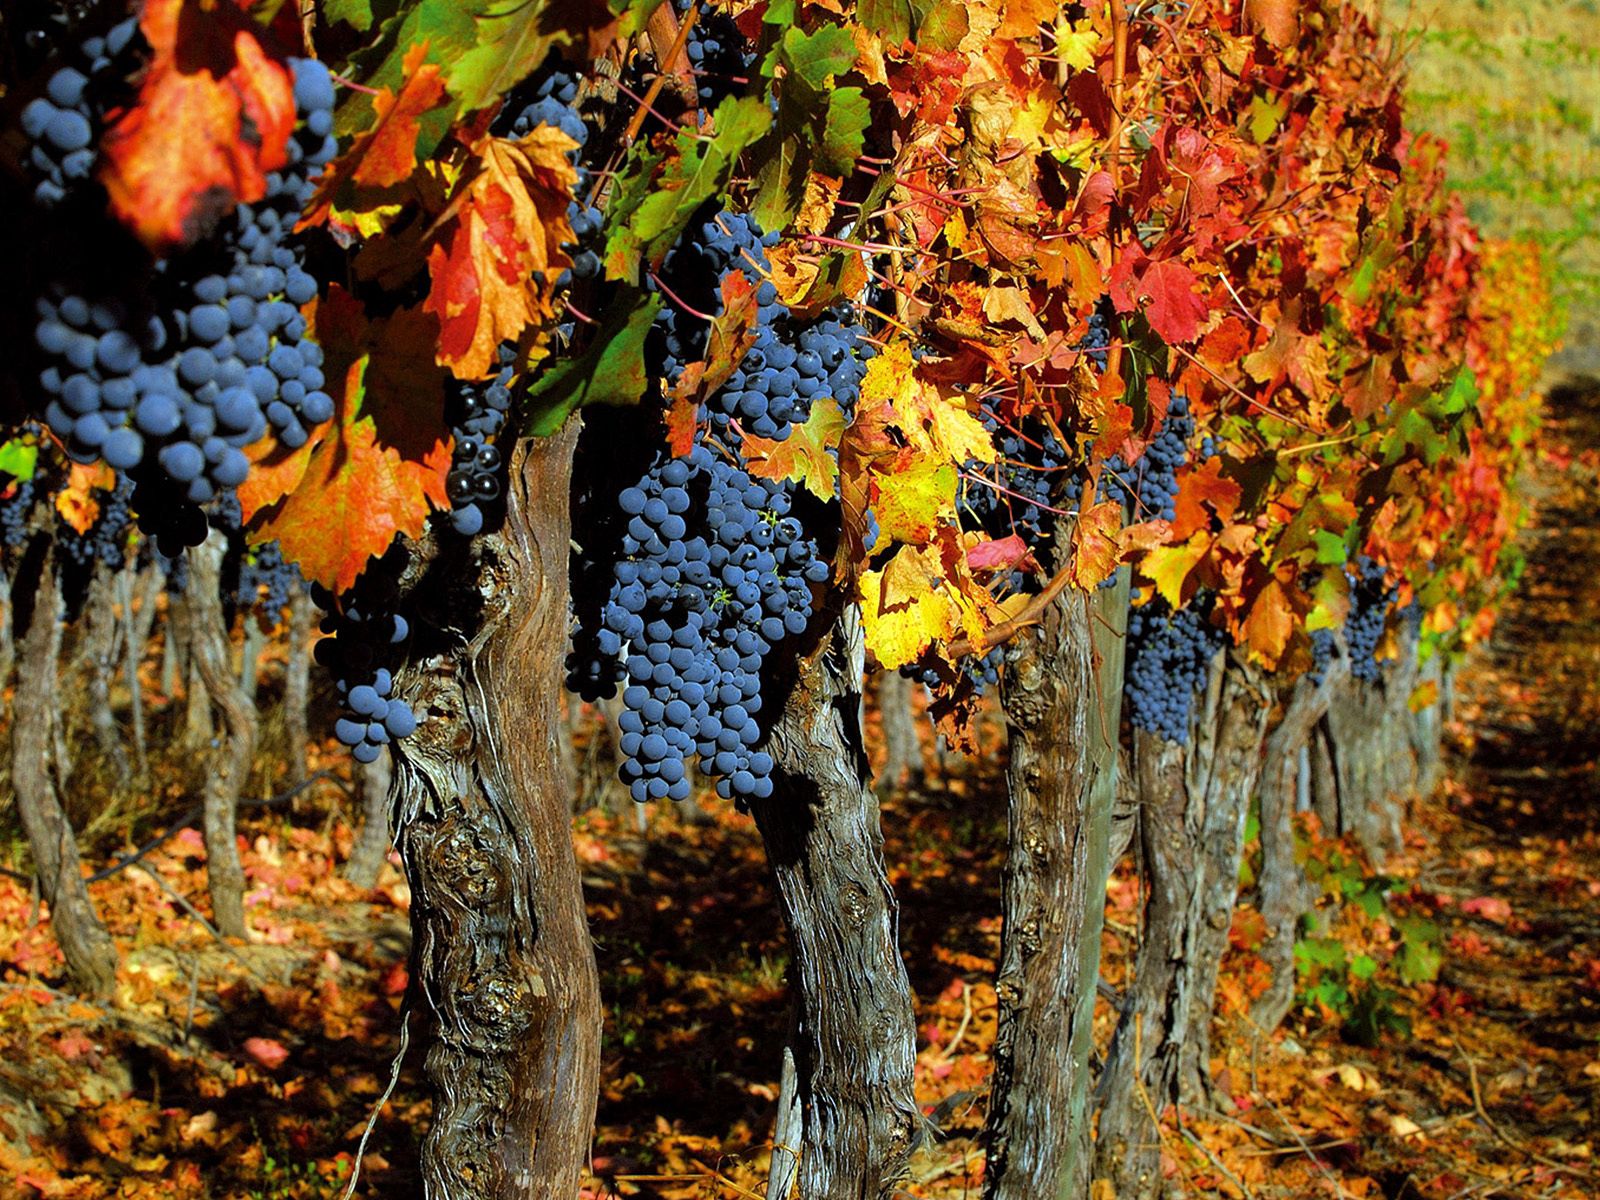 grapes, fruits, autumn, trees, food, leaves, bunches, clusters, harvest